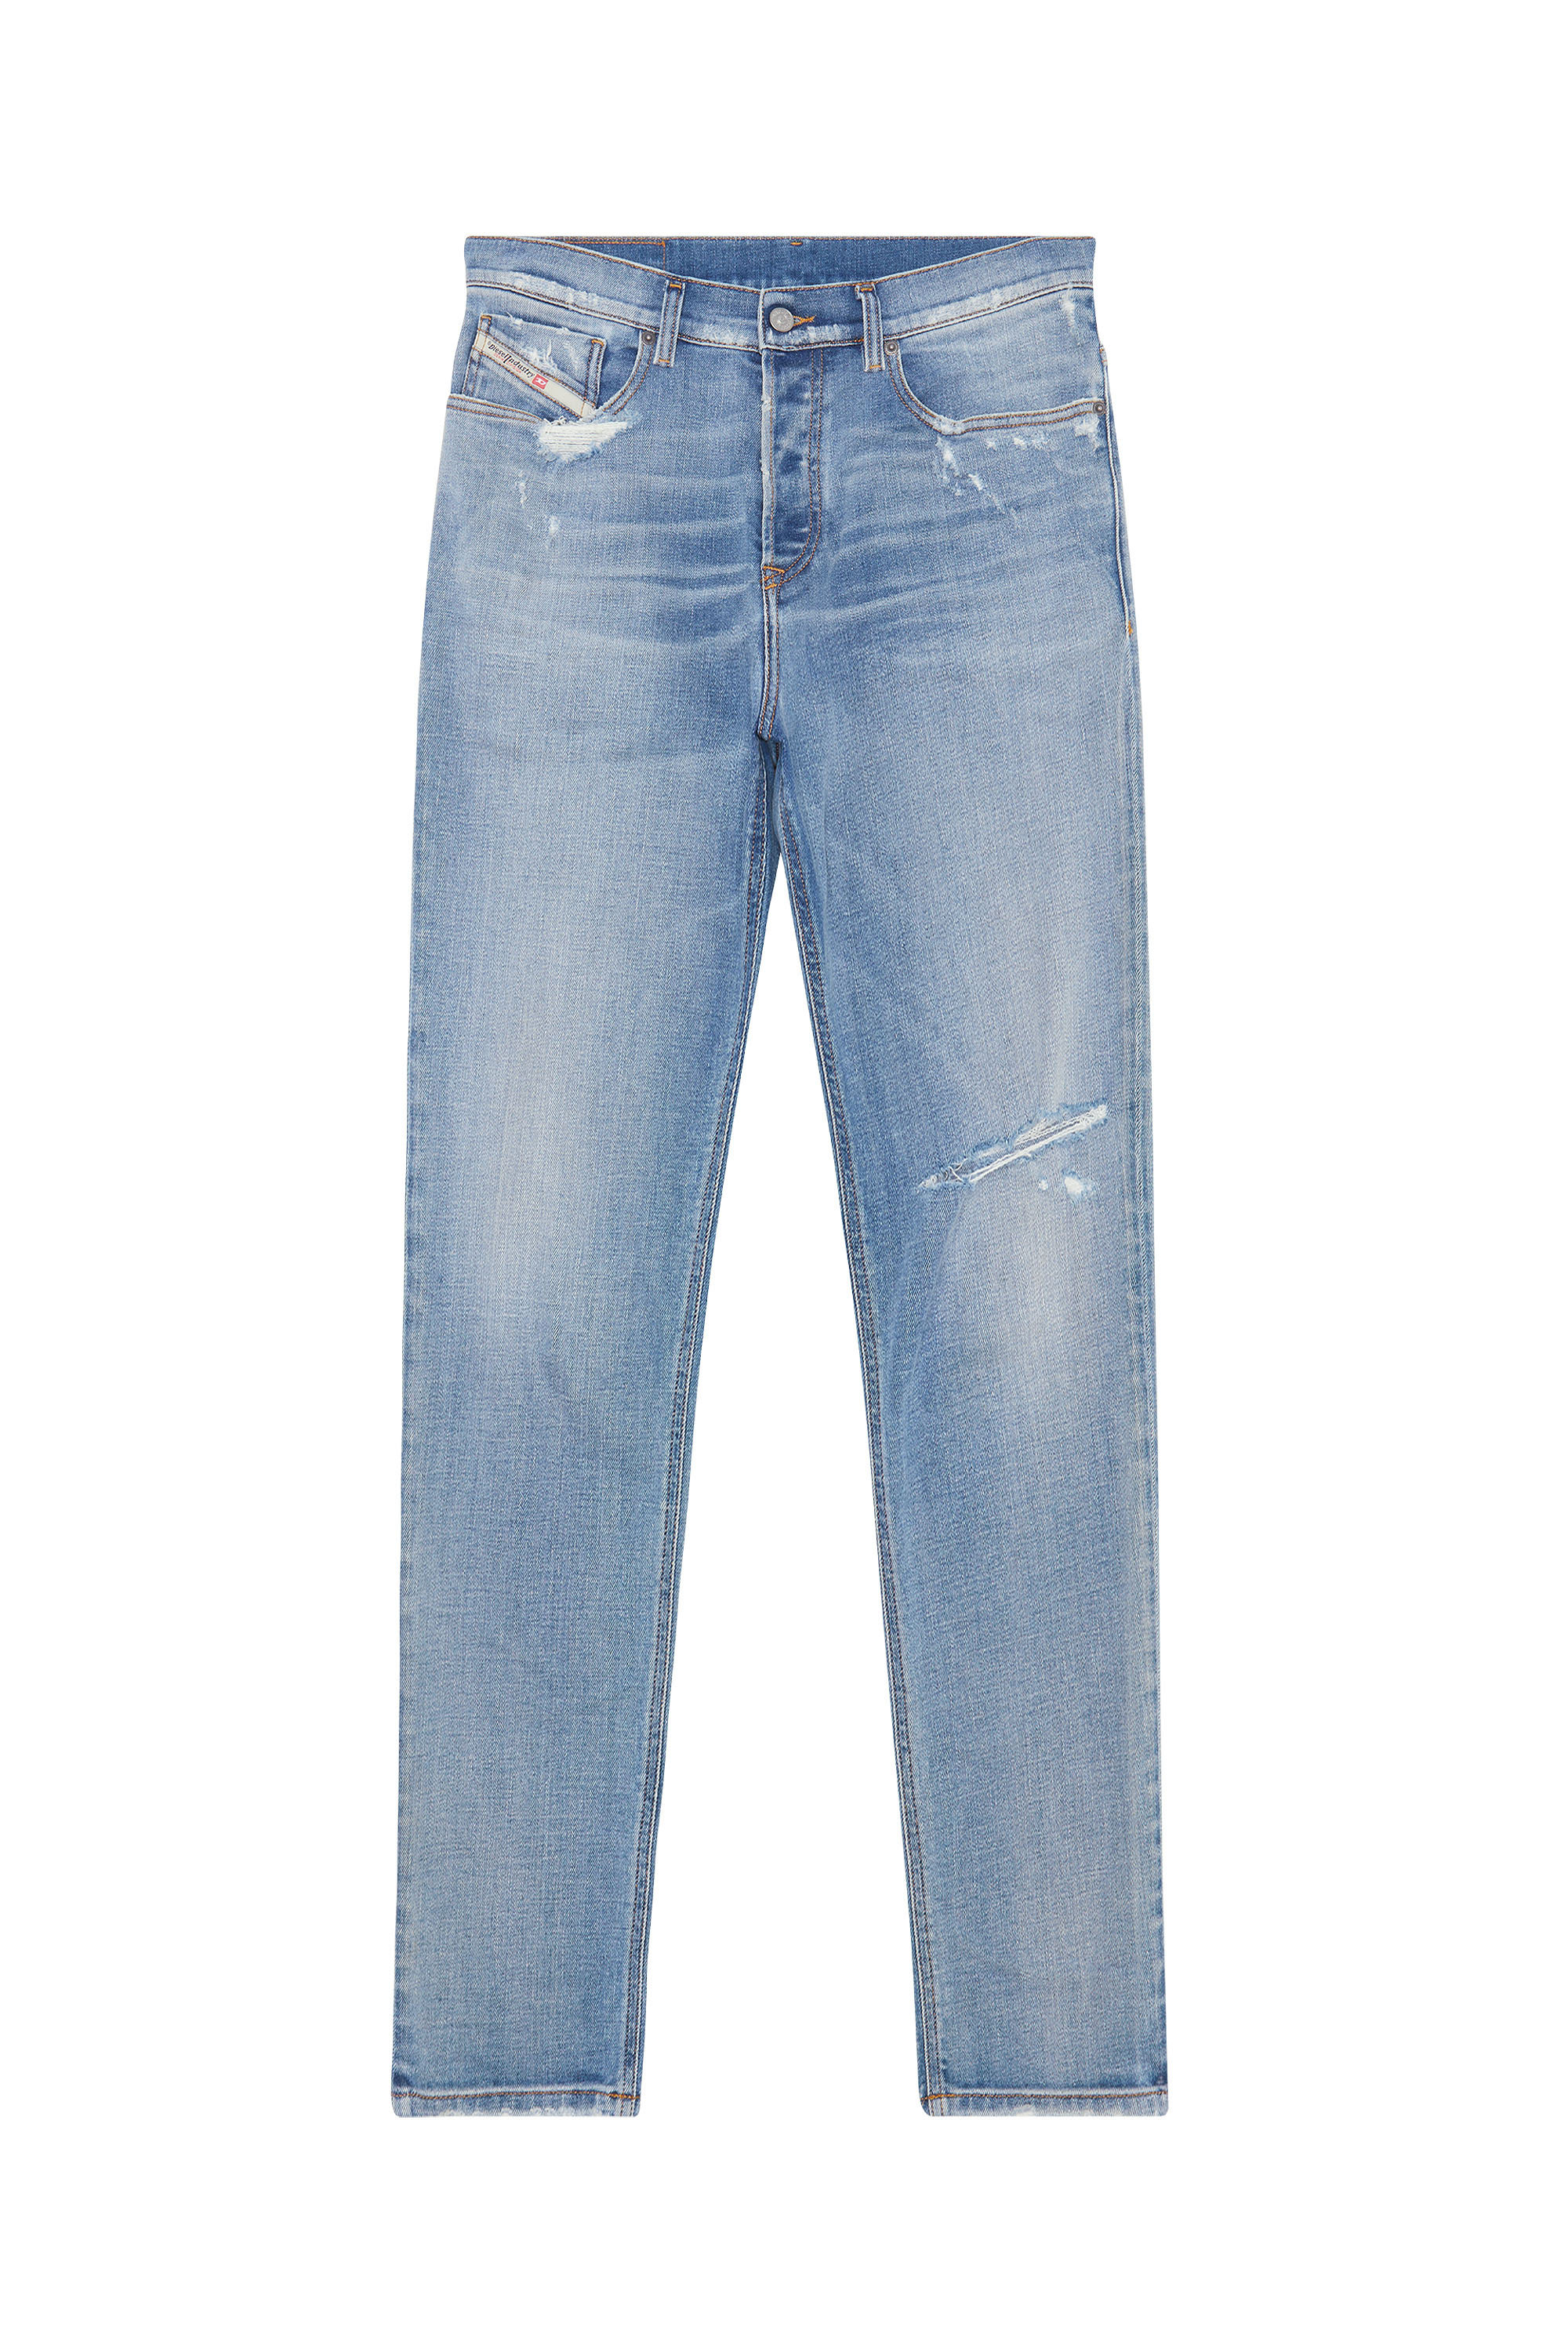 2005 D-FINING 09E17 Tapered Jeans, Hellblau - Jeans